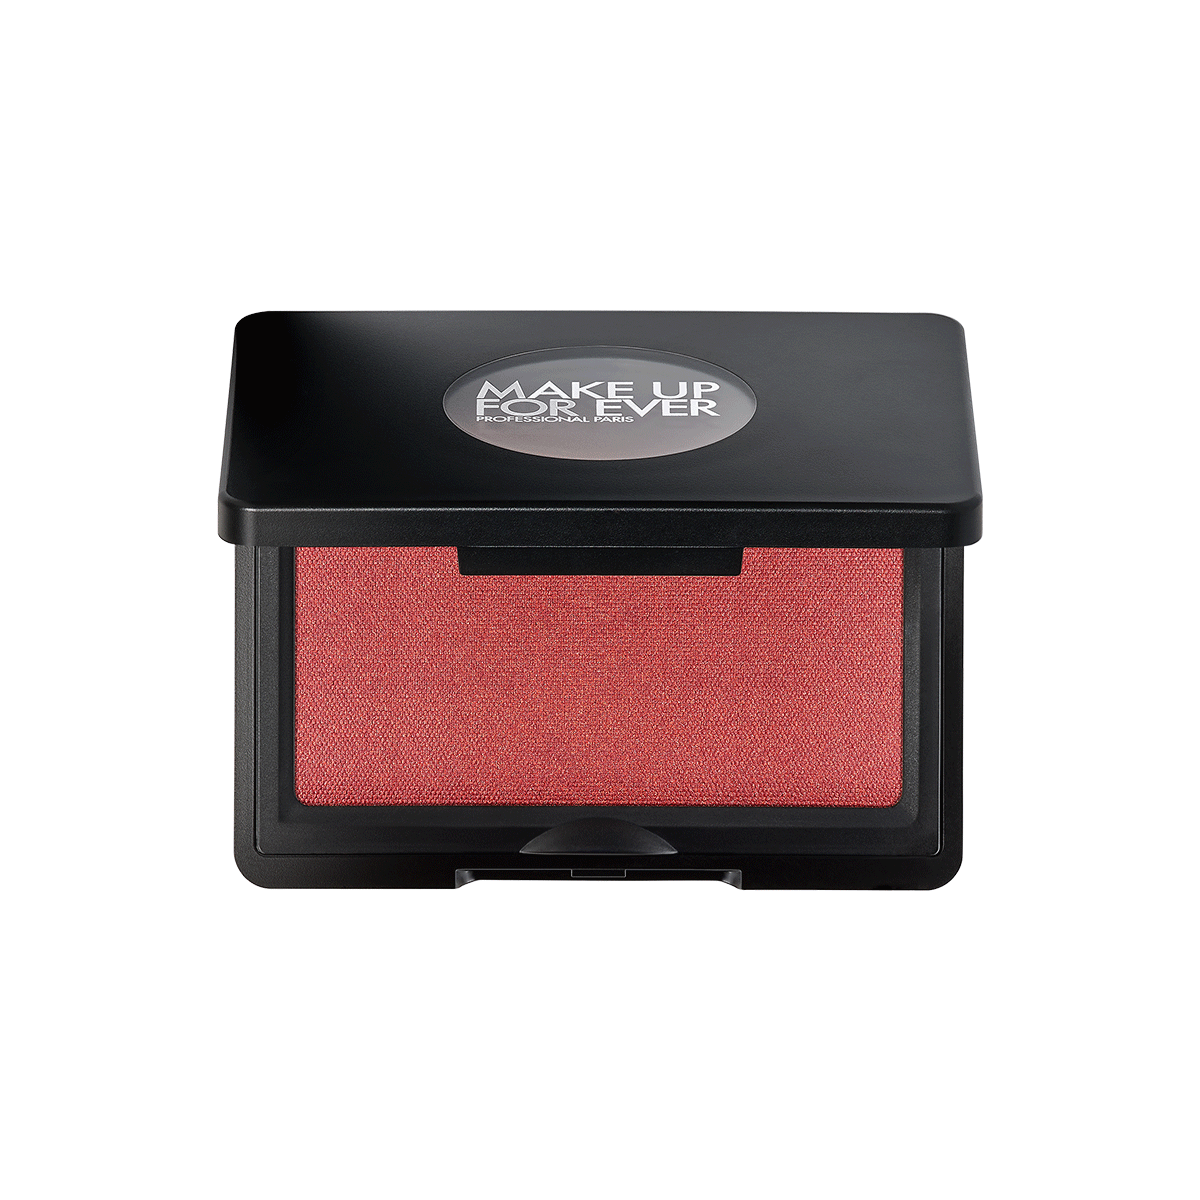 Make Up For Ever Artist Powder Blush In Cheeky Cherry